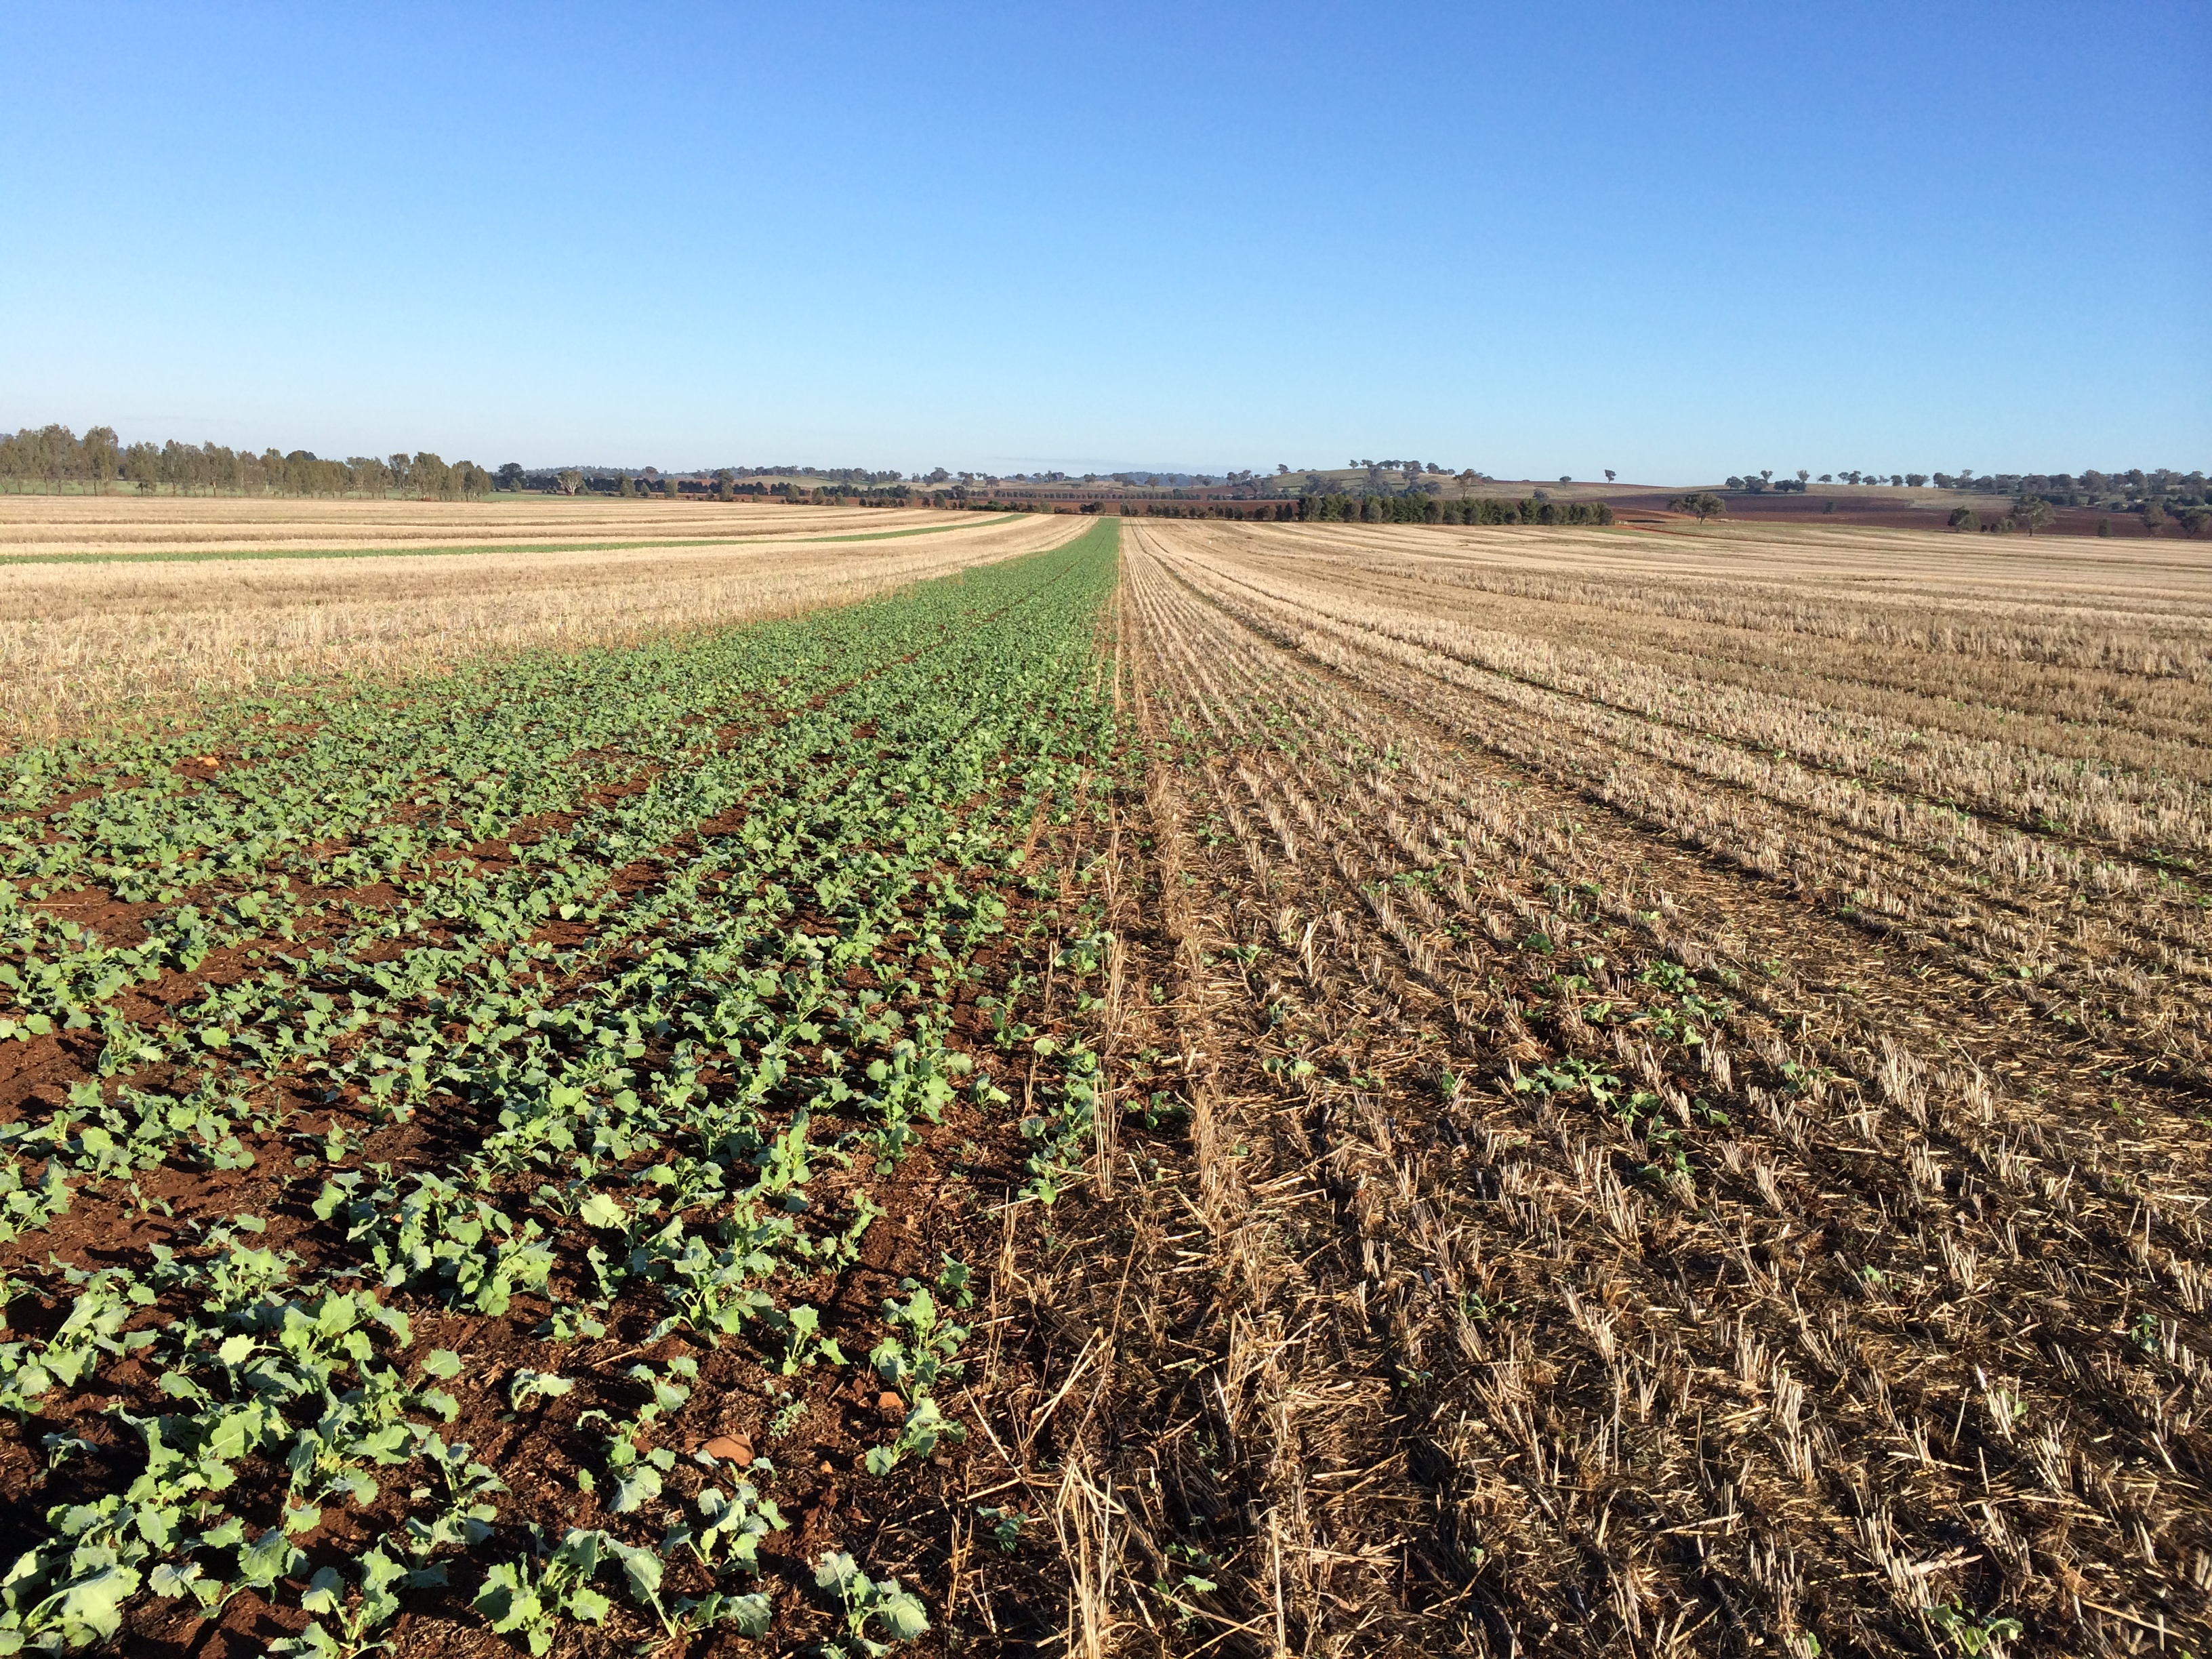 Figure 1. Canola establishment and growth in an experiment conducted by FarmLink and CSIRO